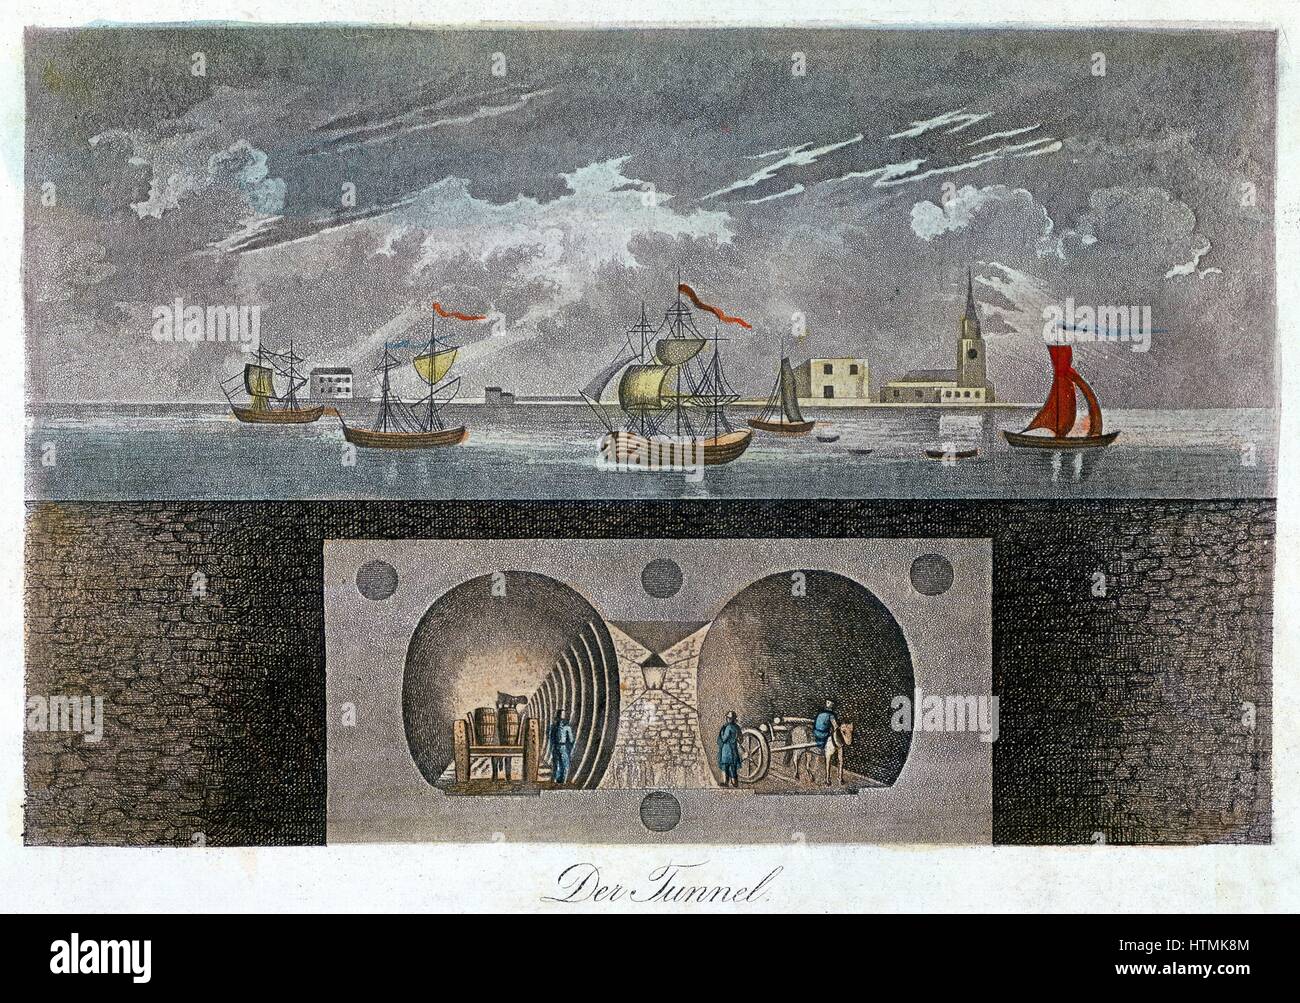 Cross-section showing position of Thames and M.I. Brunel's double arched masonry tunnel (1825-43) I.K. Brunel acted as site engineer. Still used by electric trains. German aquatint c.1830. Stock Photo